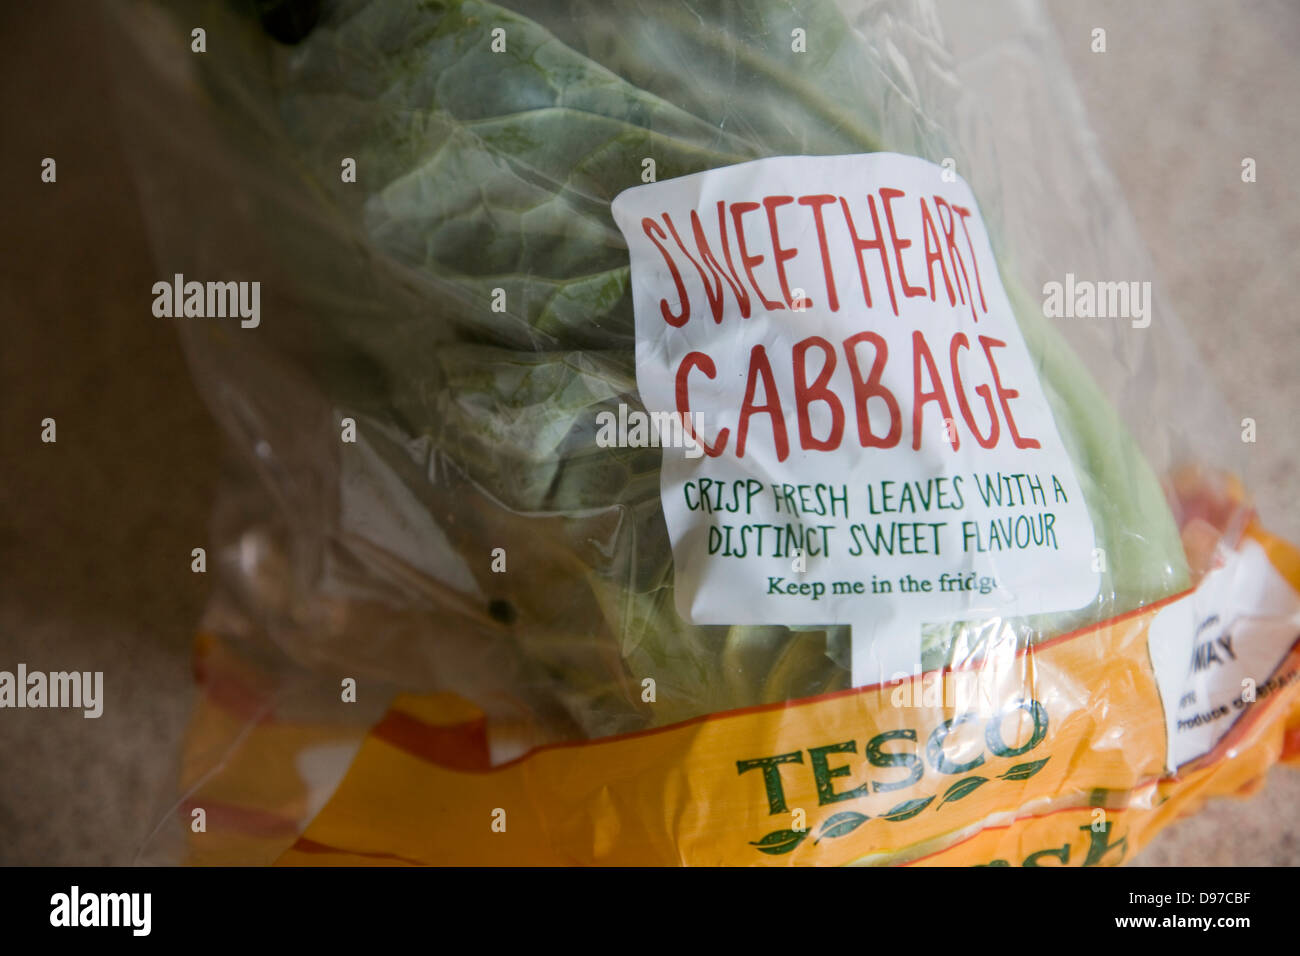 Sweetheart cabbage from Tesco in packaging Stock Photo